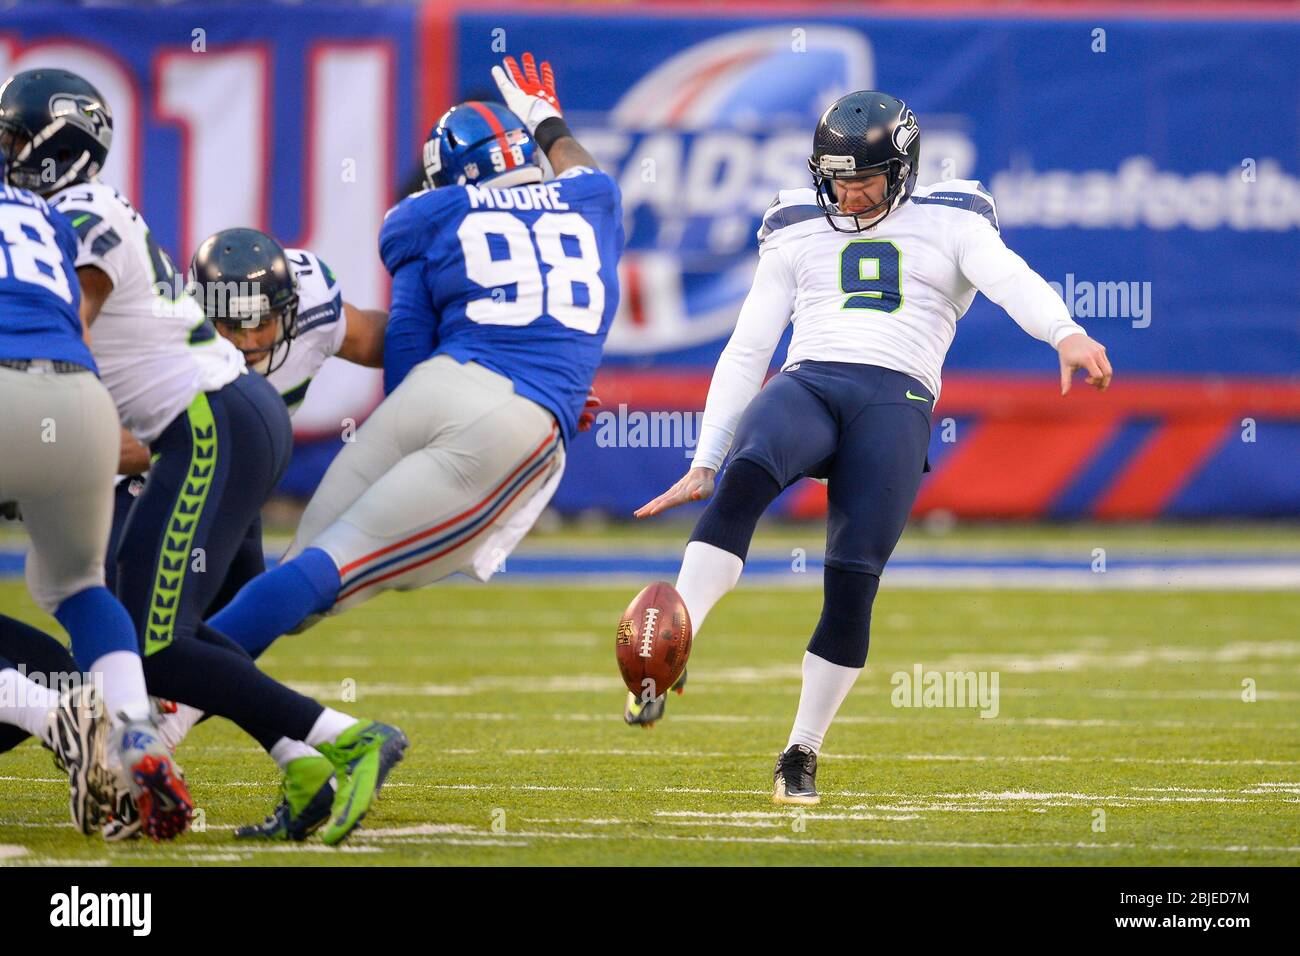 December 15, 2013: New York Giants defensive end Damontre Moore (98) attempts a block on Seattle Seahawks punter Jon Ryan (9) kick during the second h Stock Photo